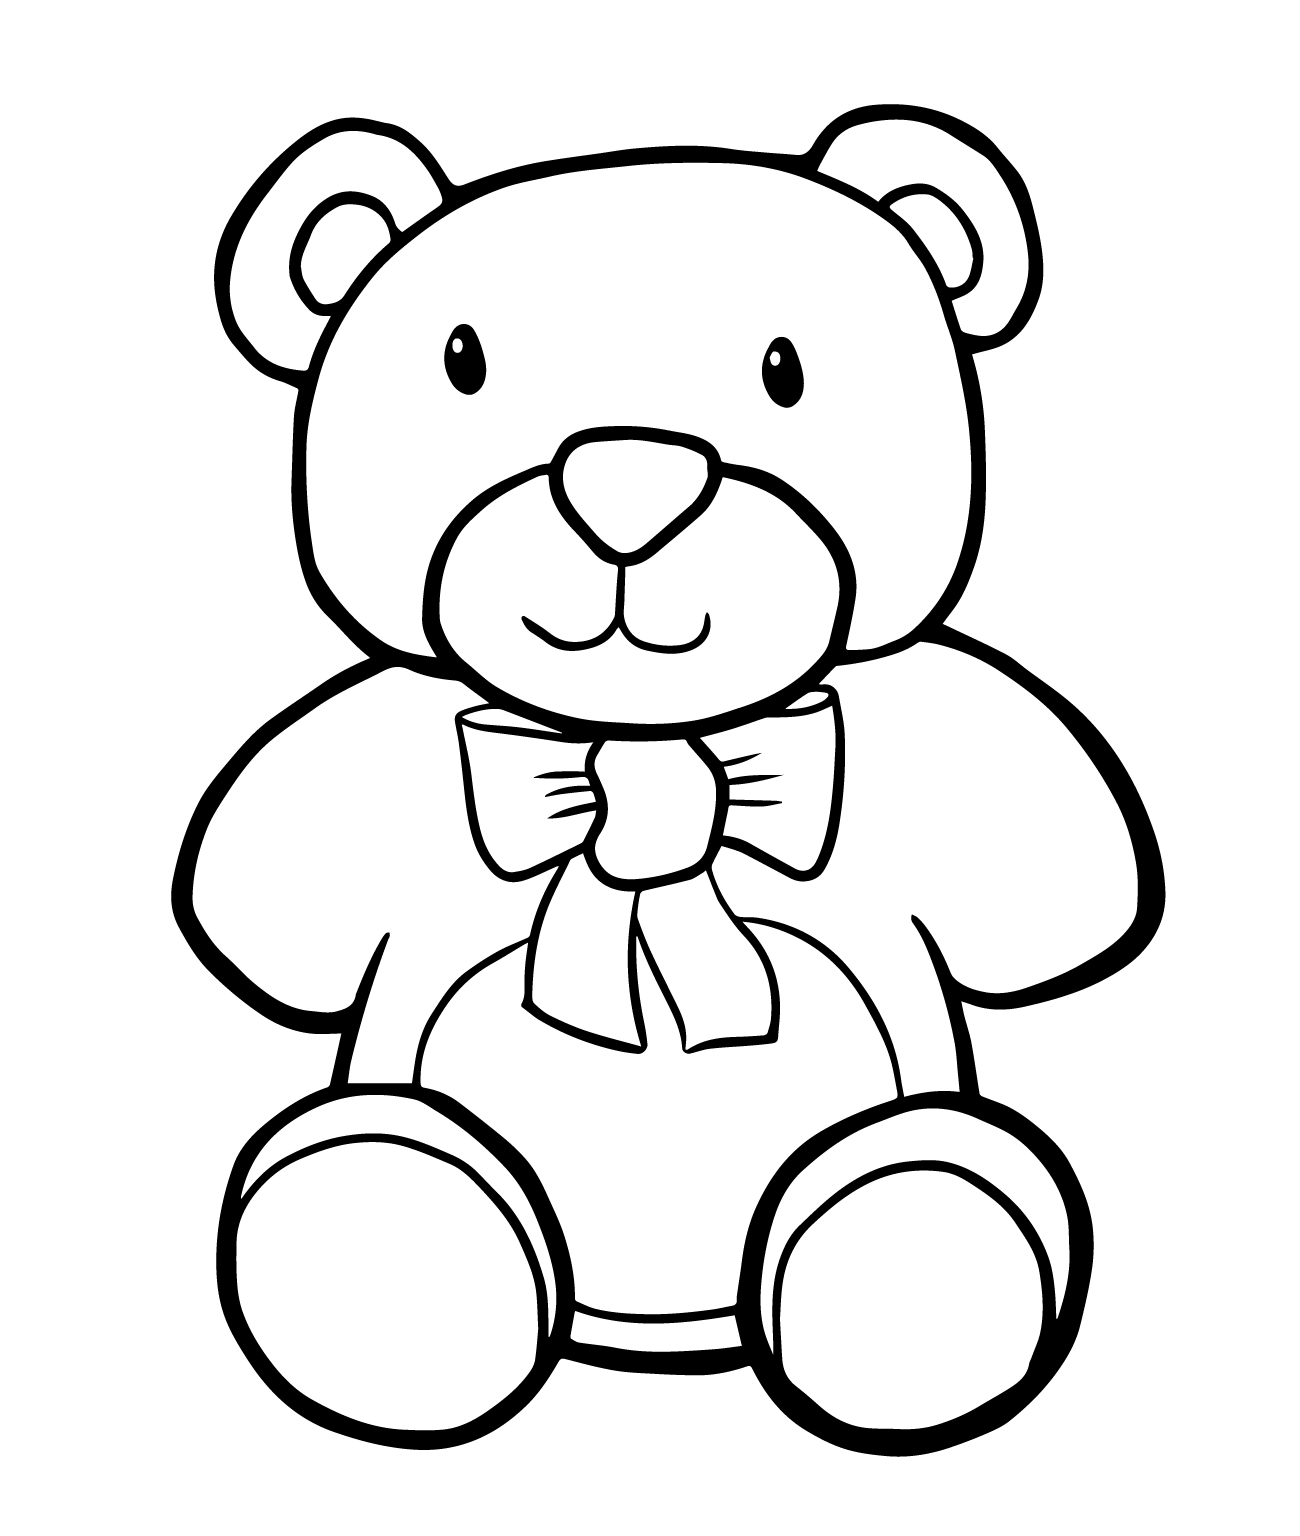 Teddy Bear Card craft to color in | Kids art drawings to color in